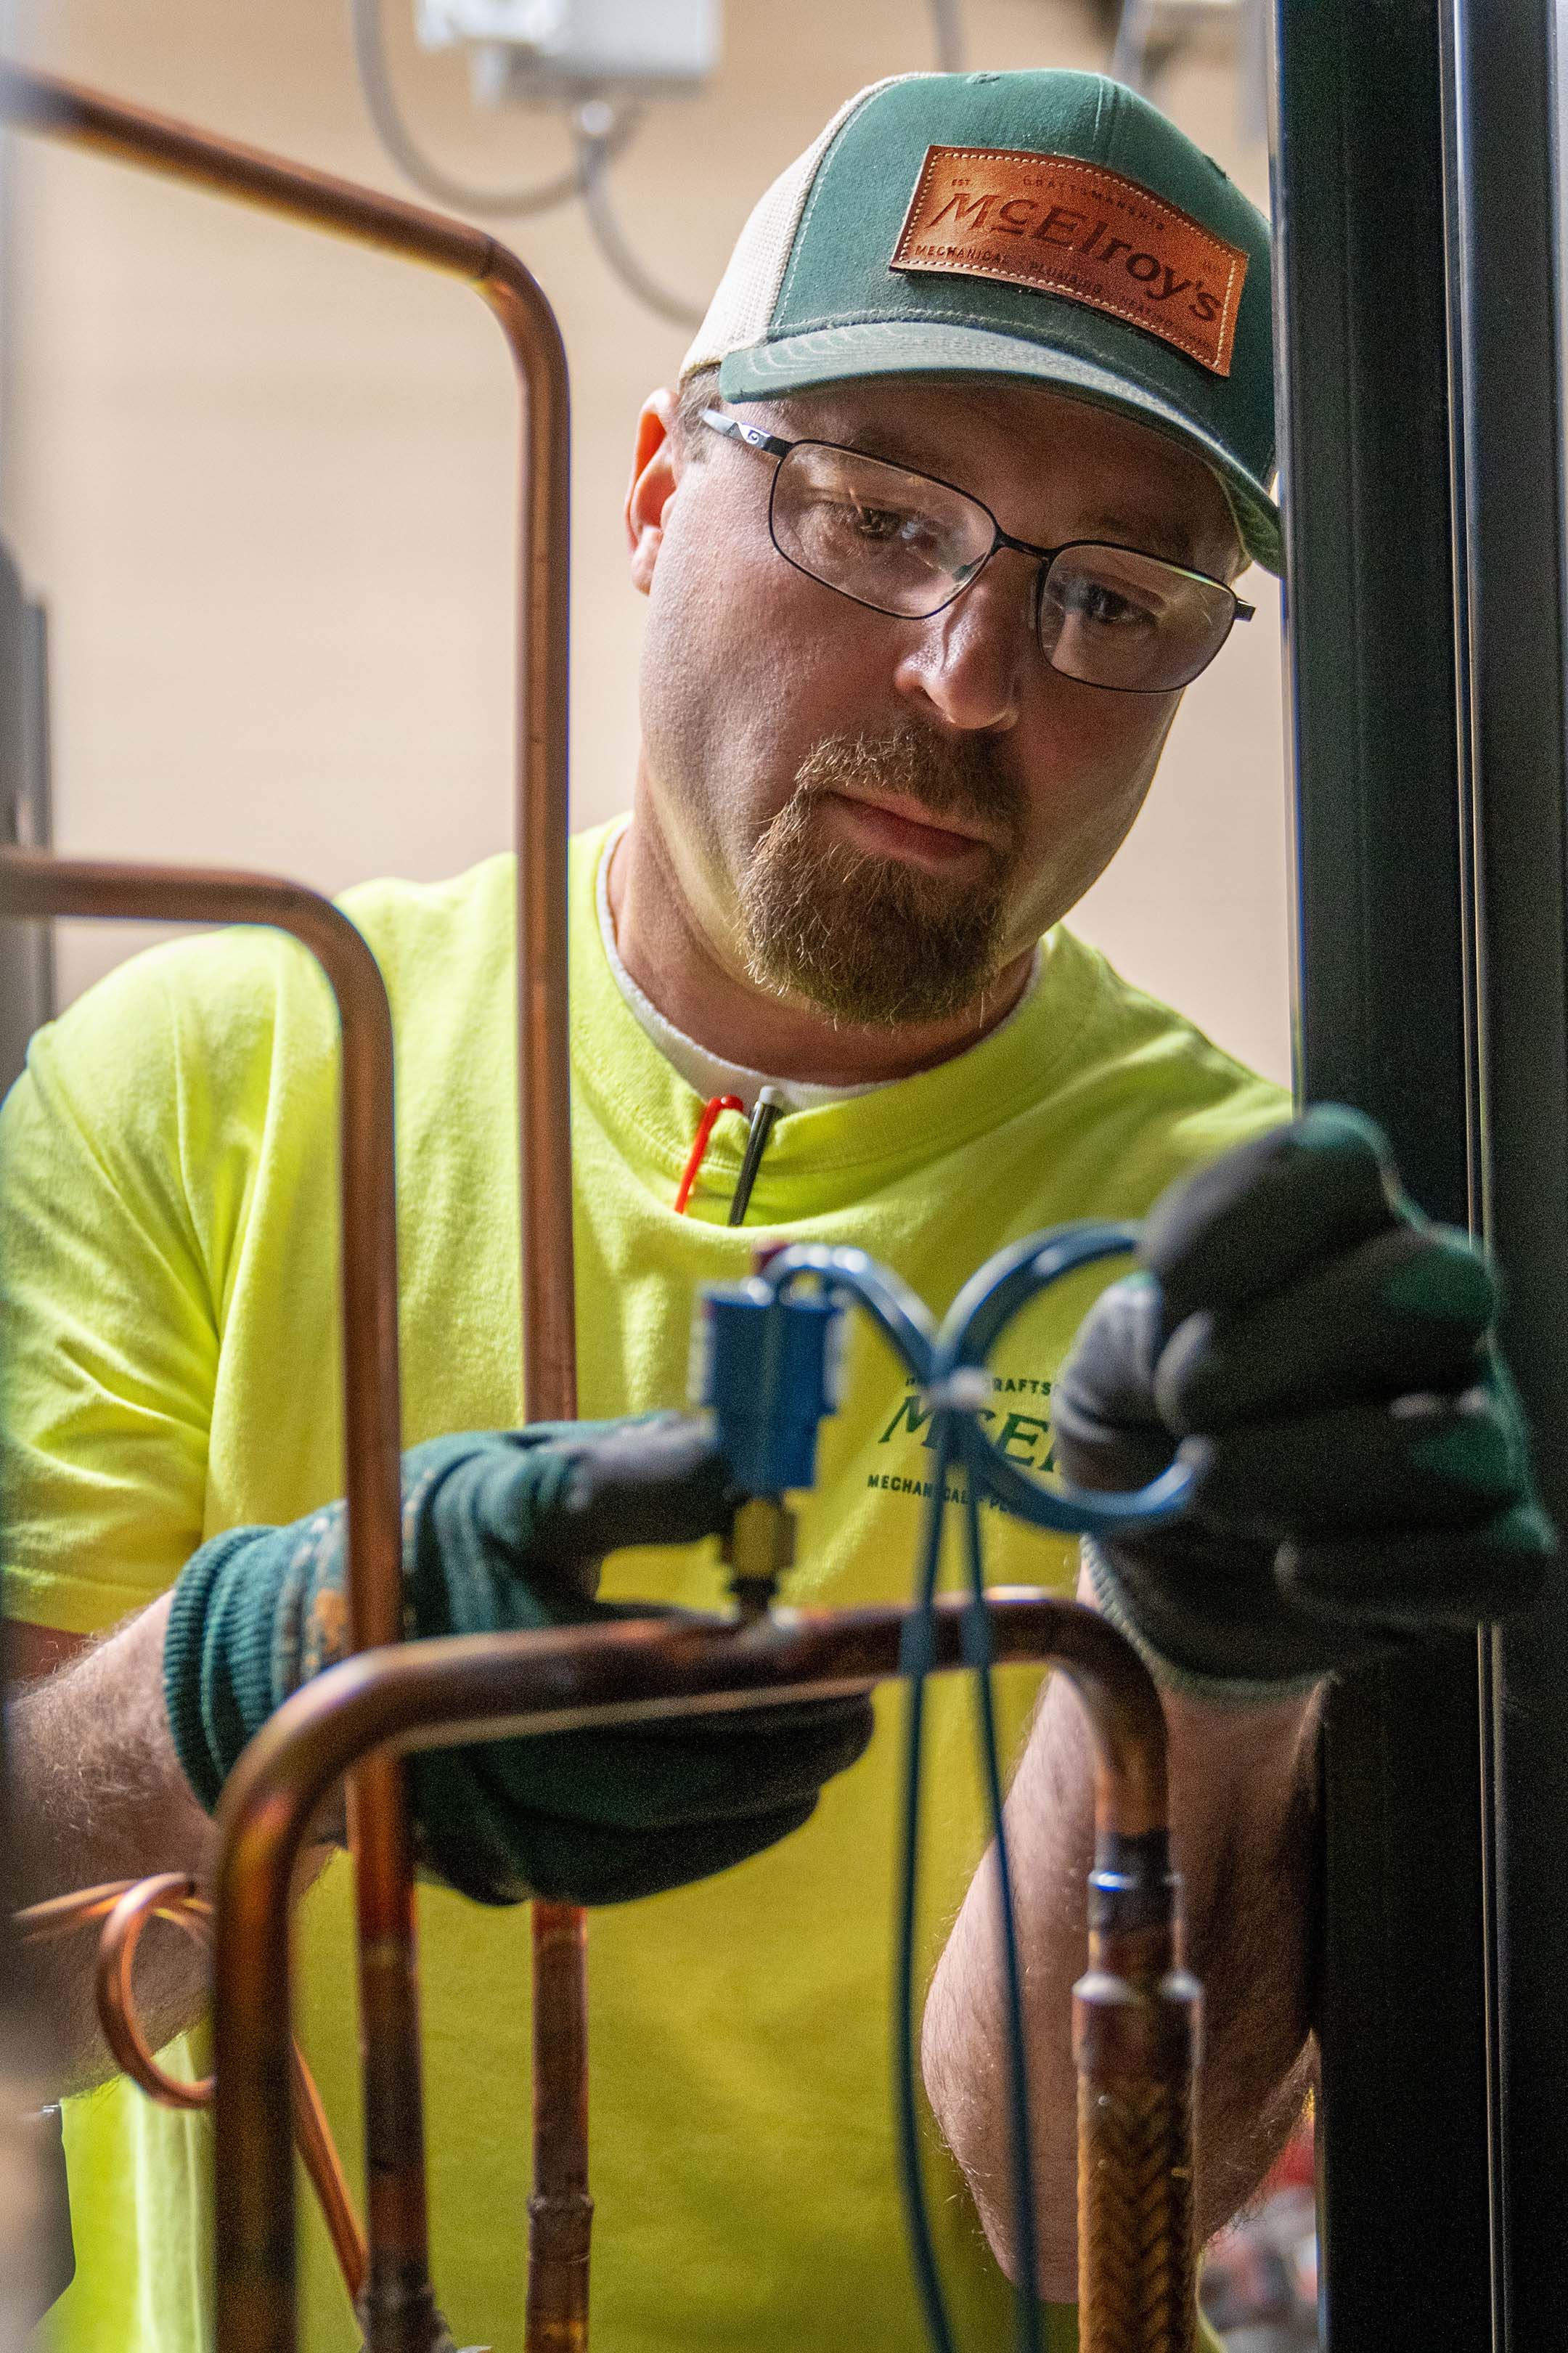 Kirk York, McElroy’s commercial-construction plumber/pipefitter, makes adjustments to a commercial HVAC system.